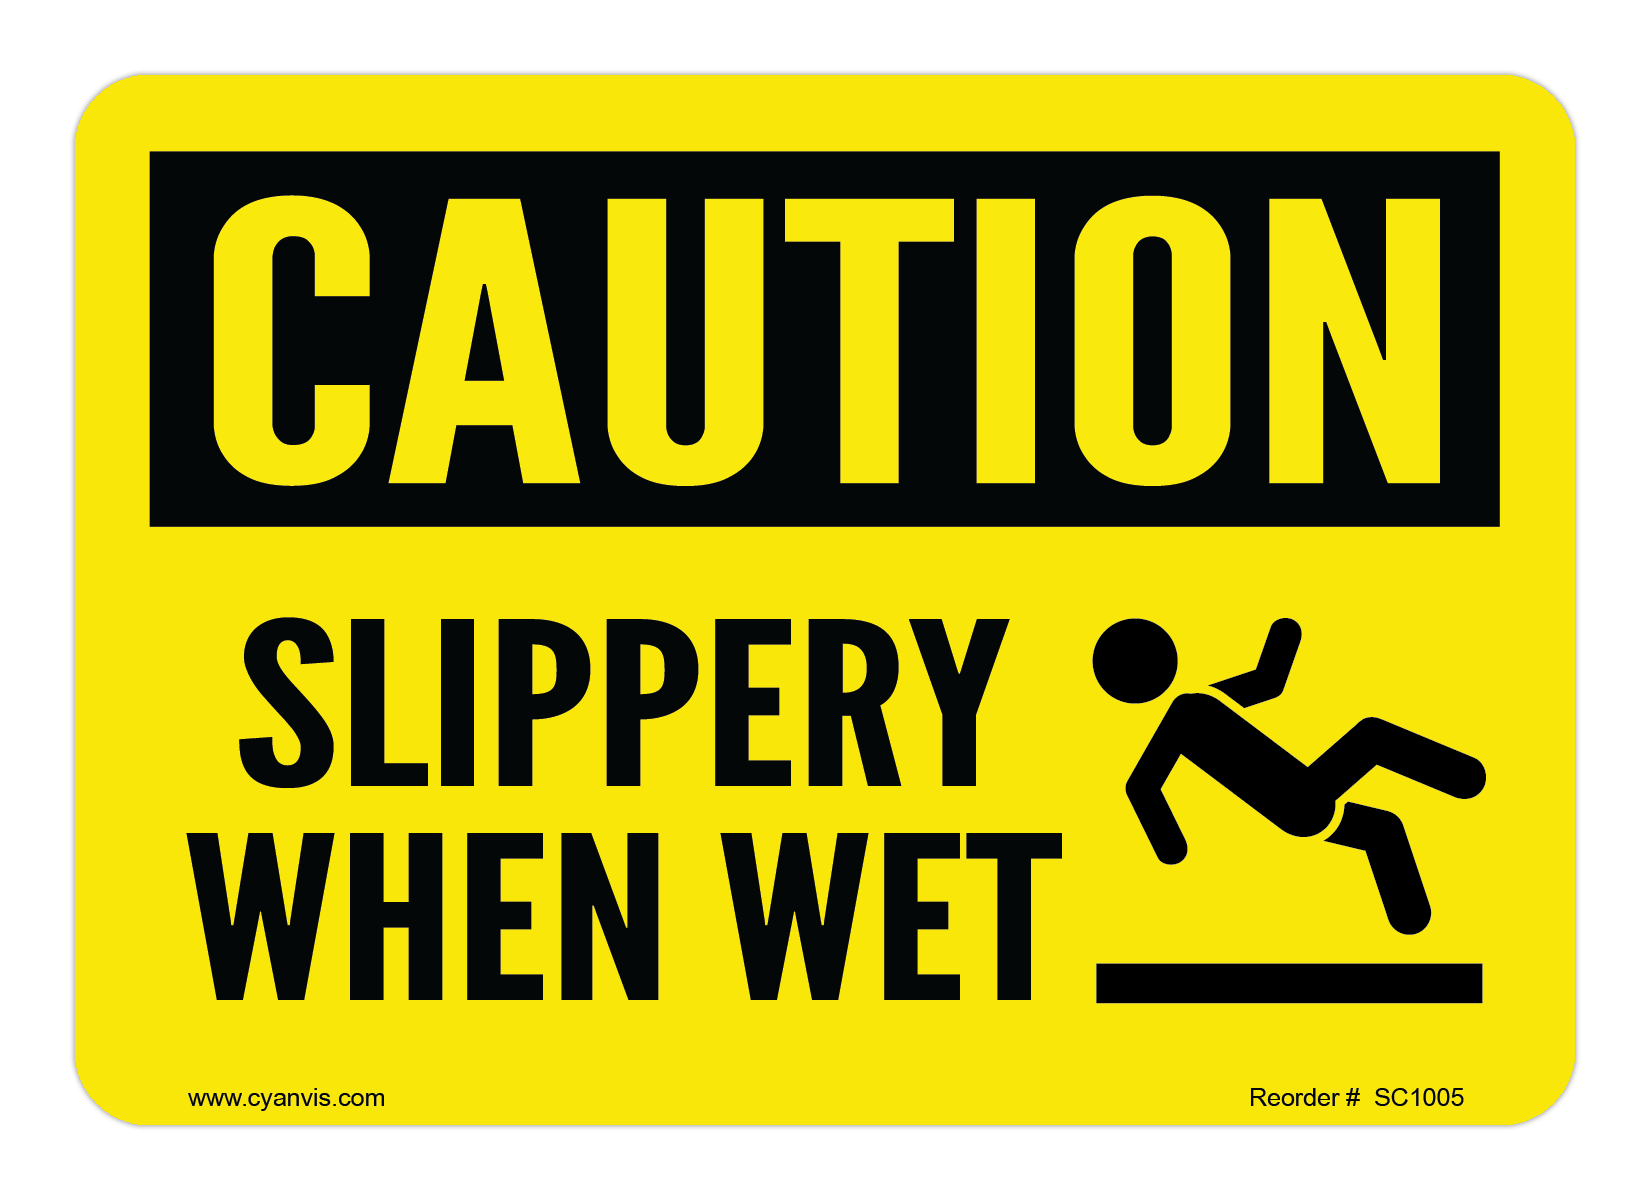 Safety Sign: Caution - SLIPPERY WHEN WET - CYANvisuals